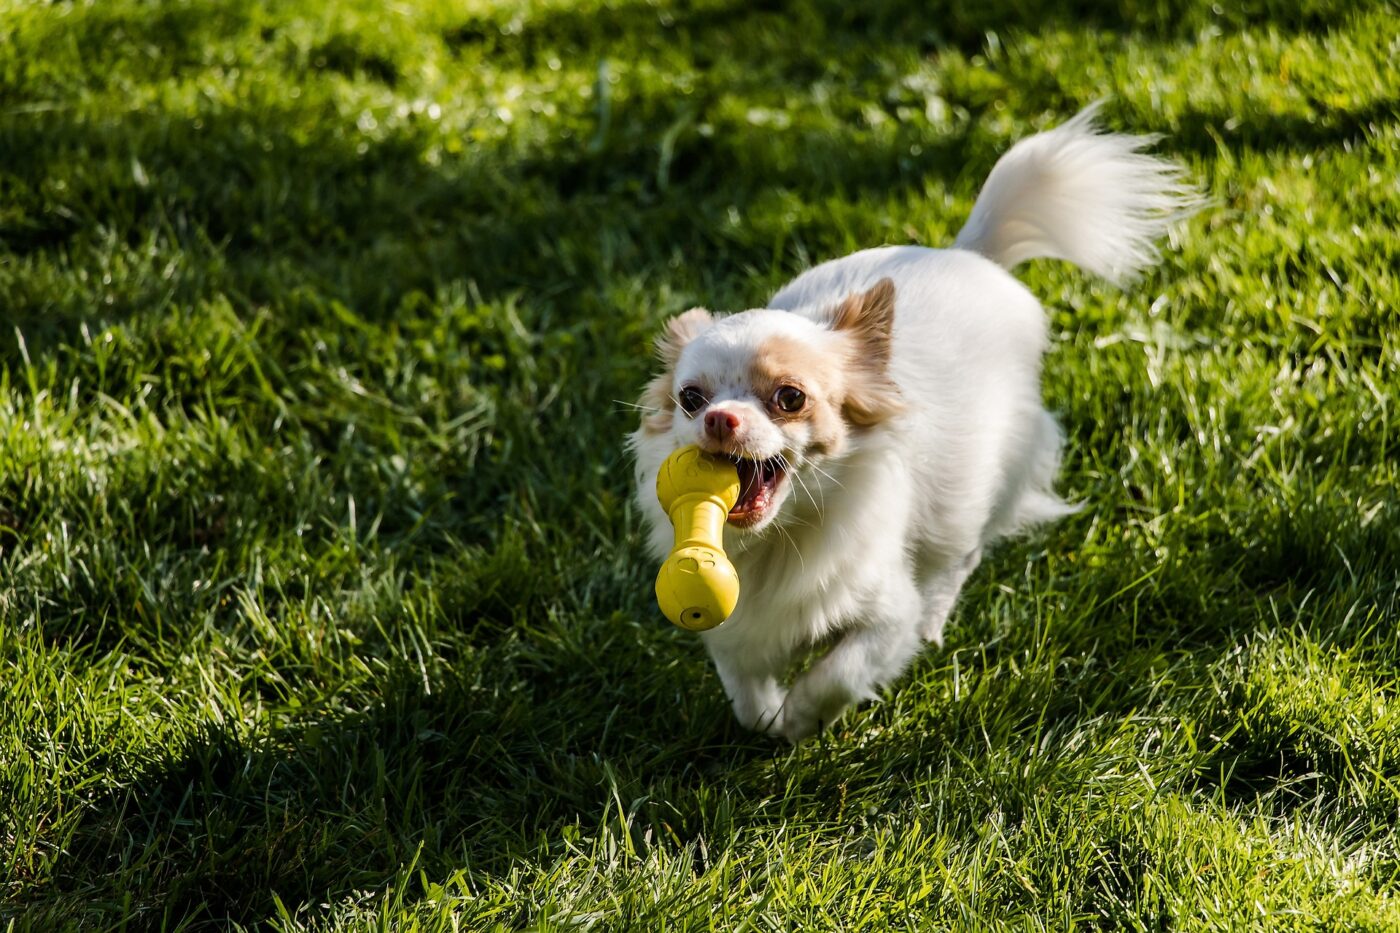 5 Best Interactive Dog Toys to Keep Dogs Entertained When Home Alone